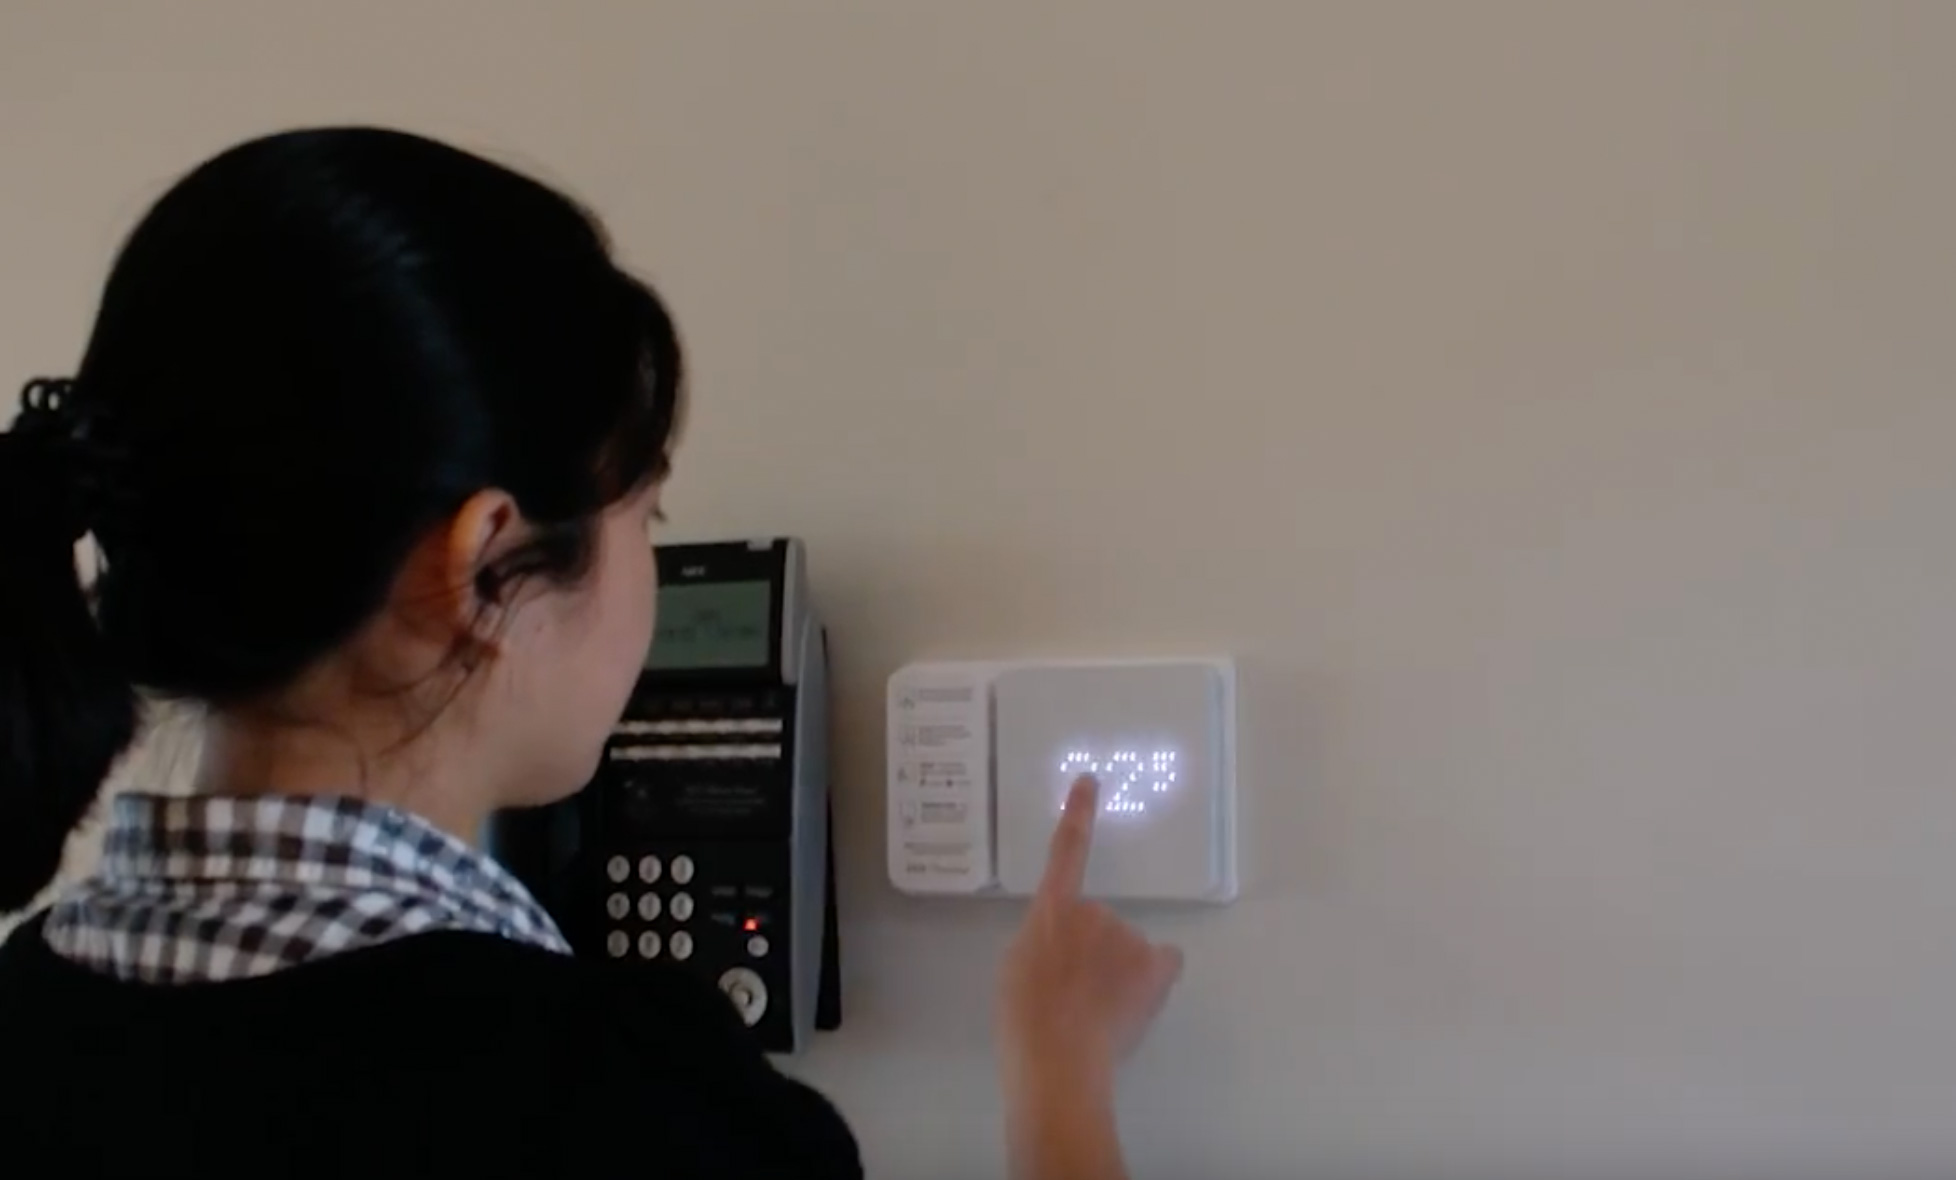 Teenage interacting with the Zen Thermostat